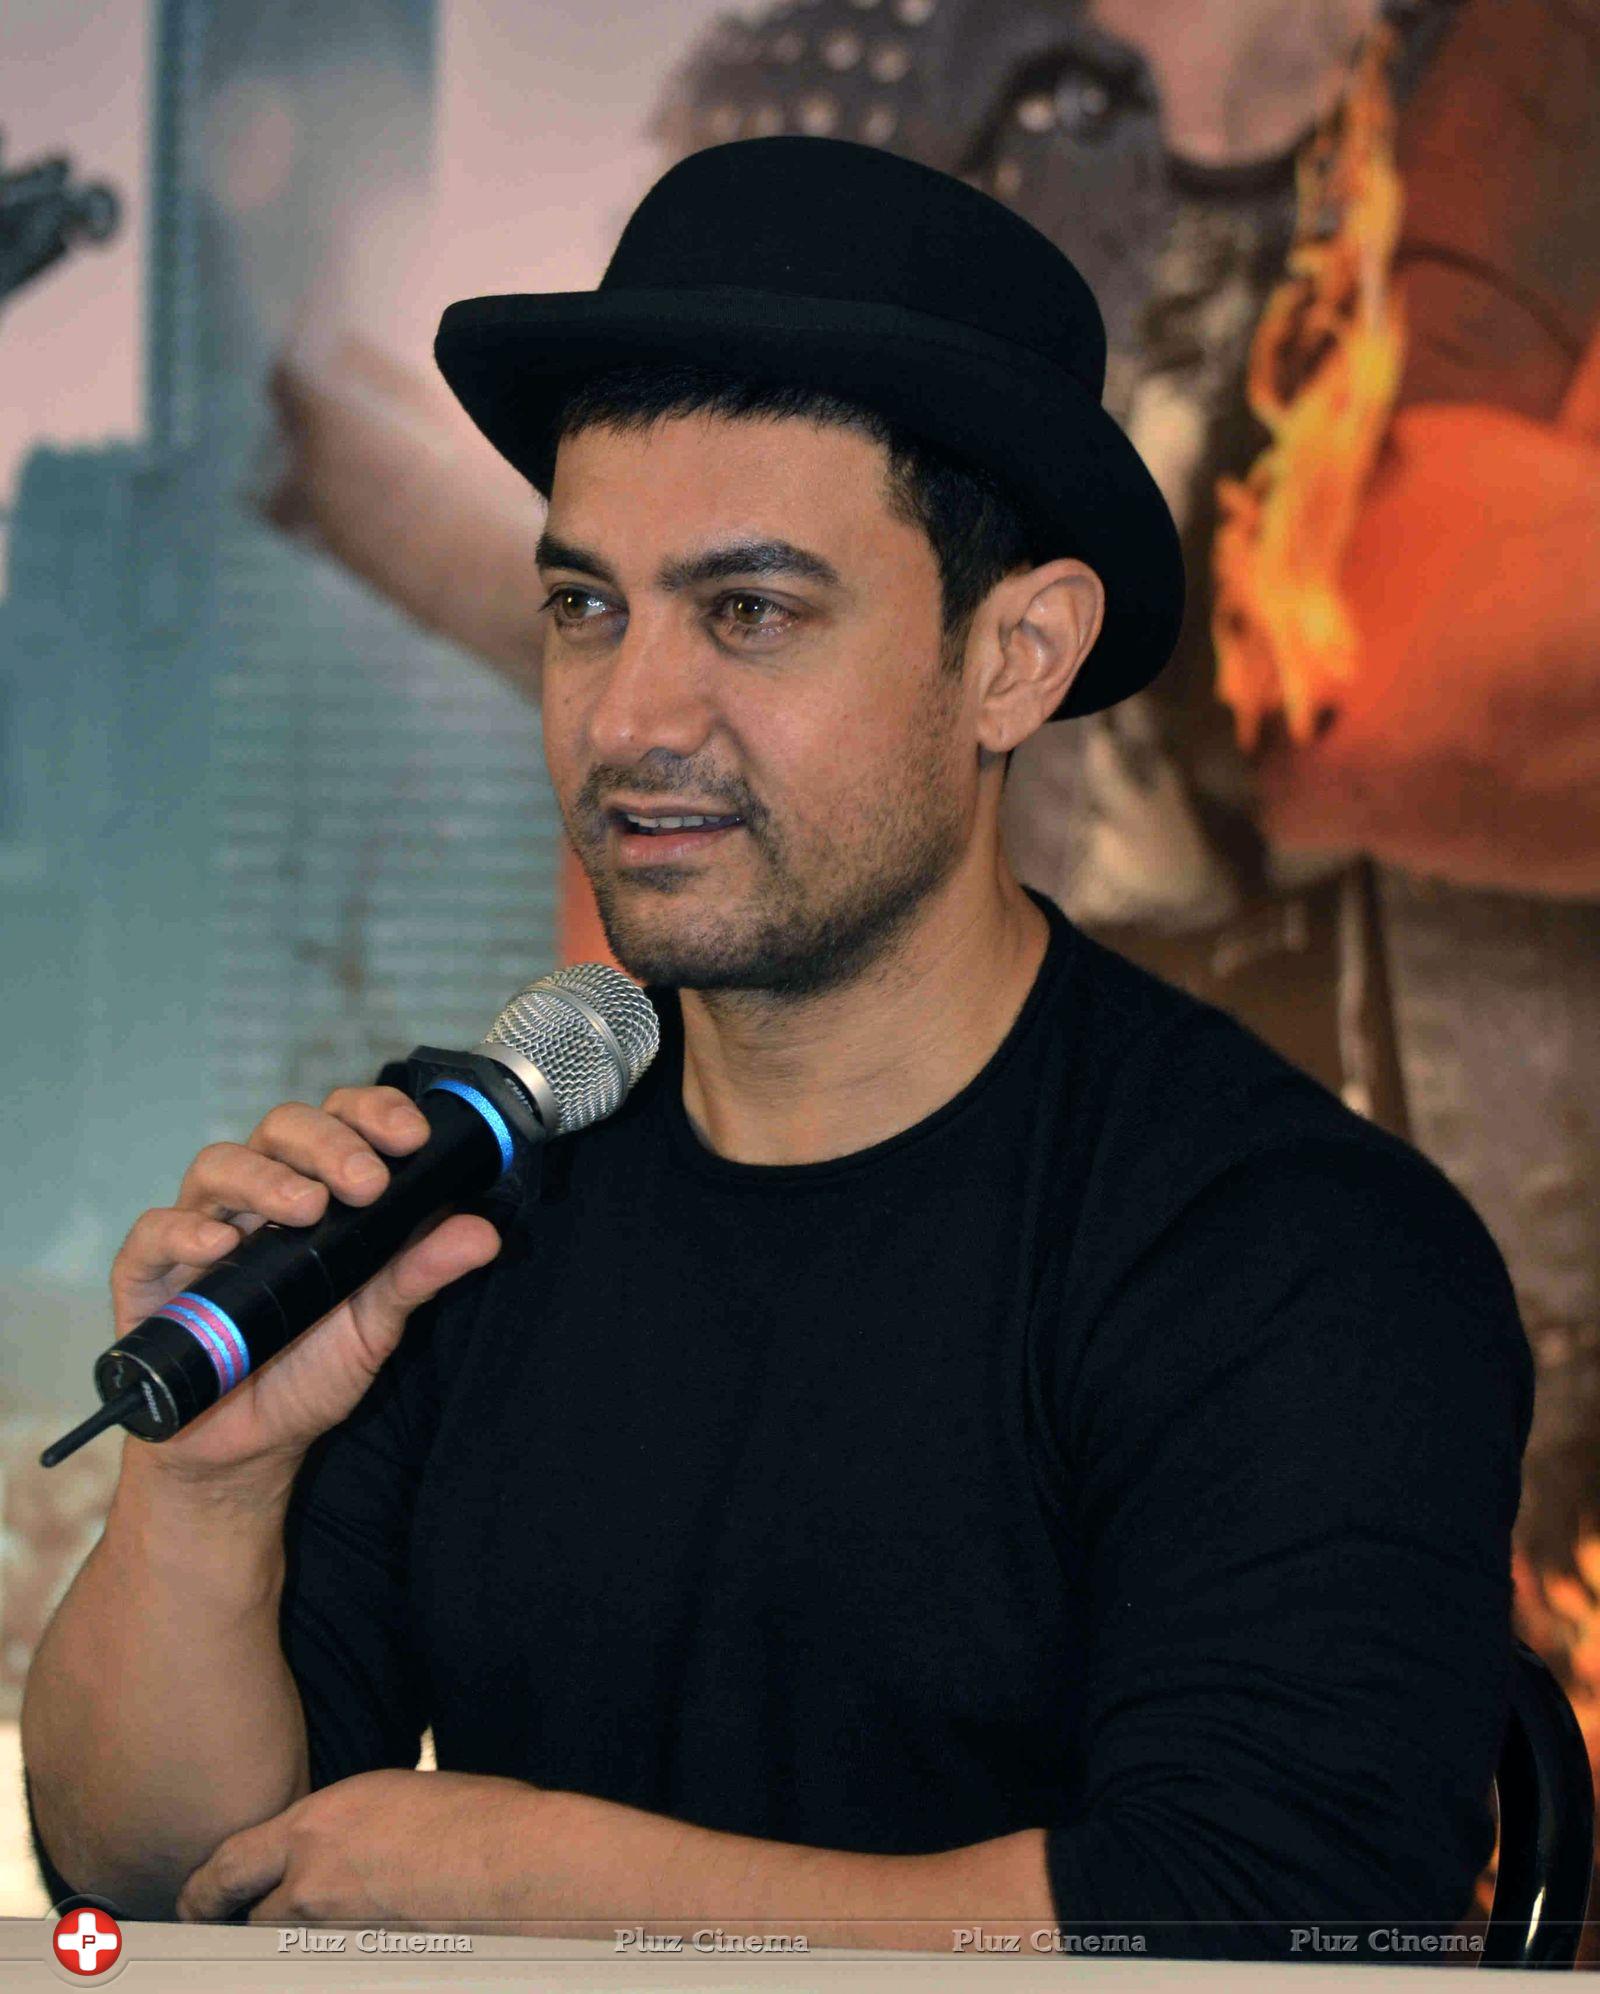 Aamir Khan - Aamir Khan press conference on Dhoom 3 Ticket Prices Photos | Picture 682330